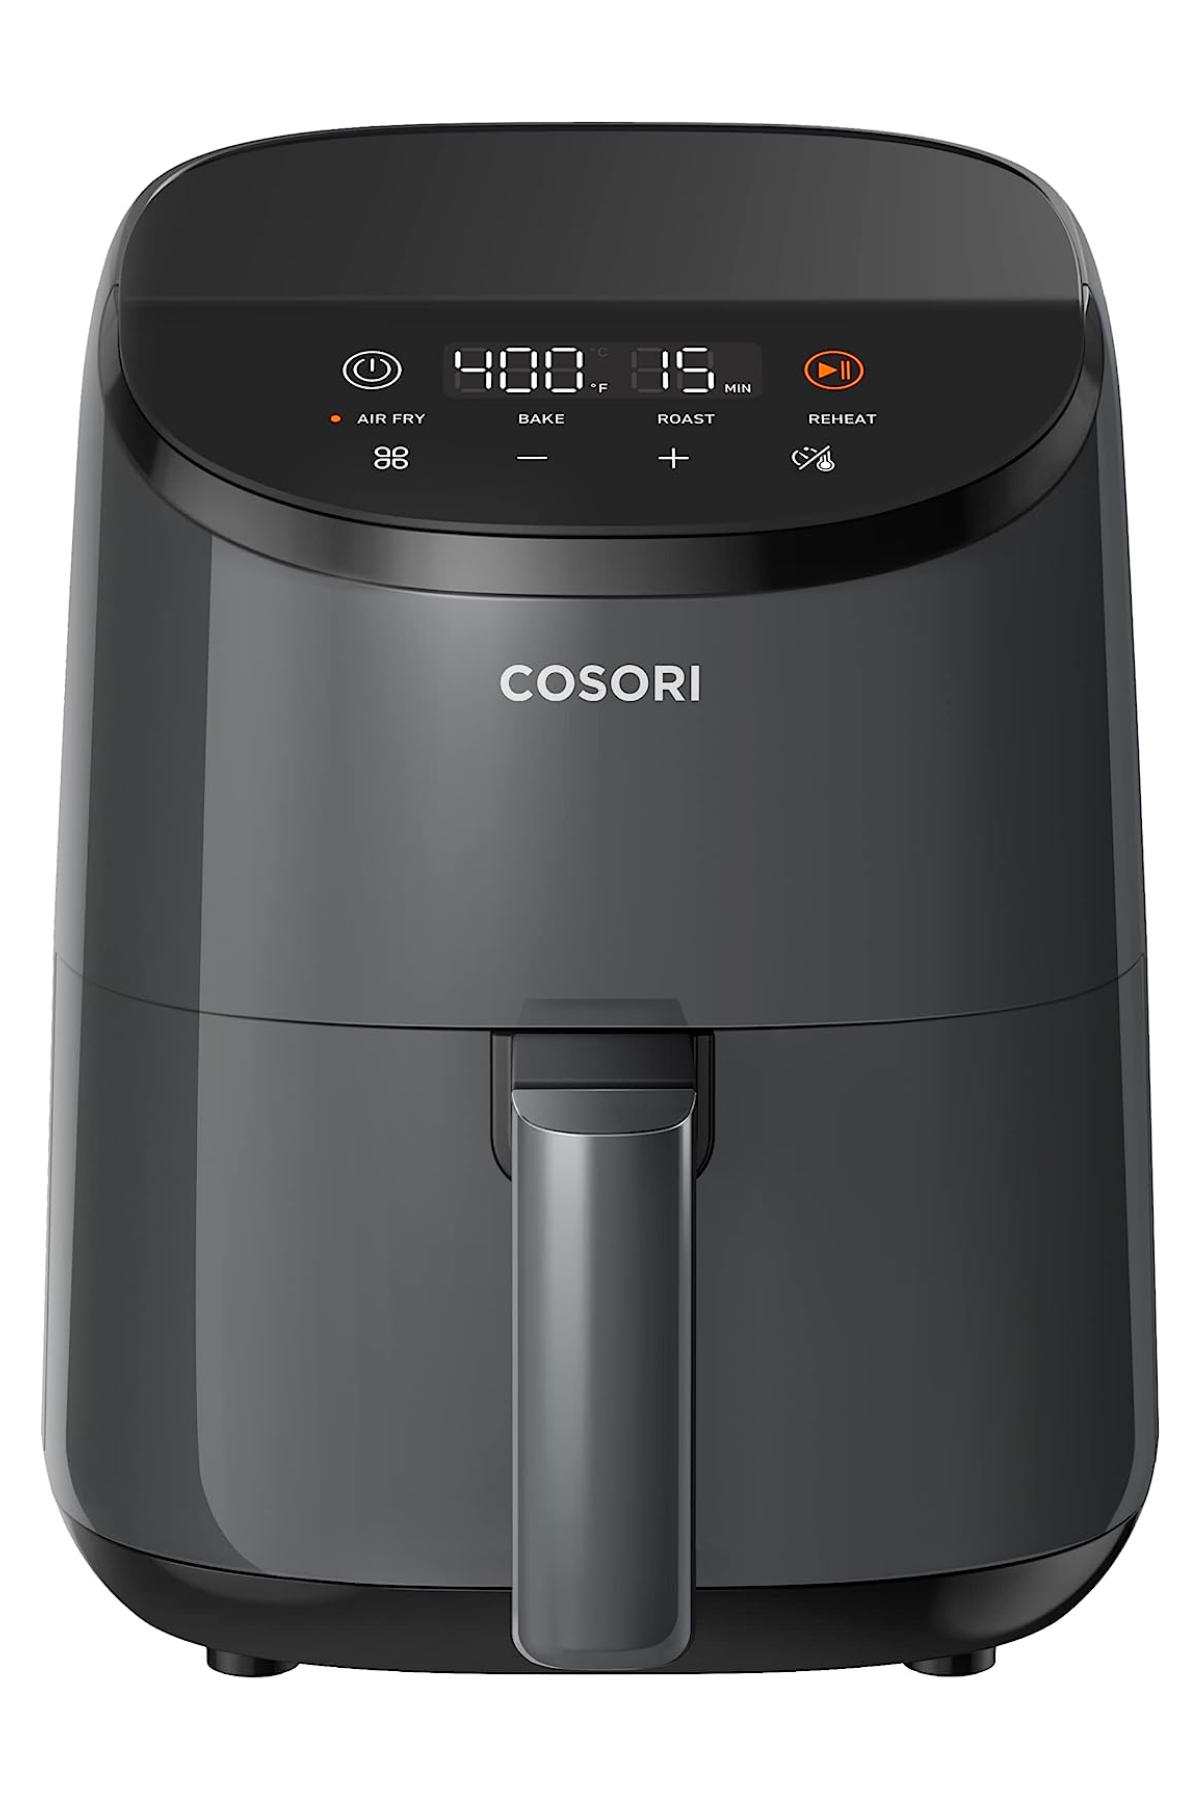 COSORI Small Air Fryer Oven 2.1 Qt, 4-in-1 Mini Airfryer, Bake, Roast, Reheat, Space-saving & Low-noise, Nonstick and Dishwasher Safe Basket, 30 In-App...